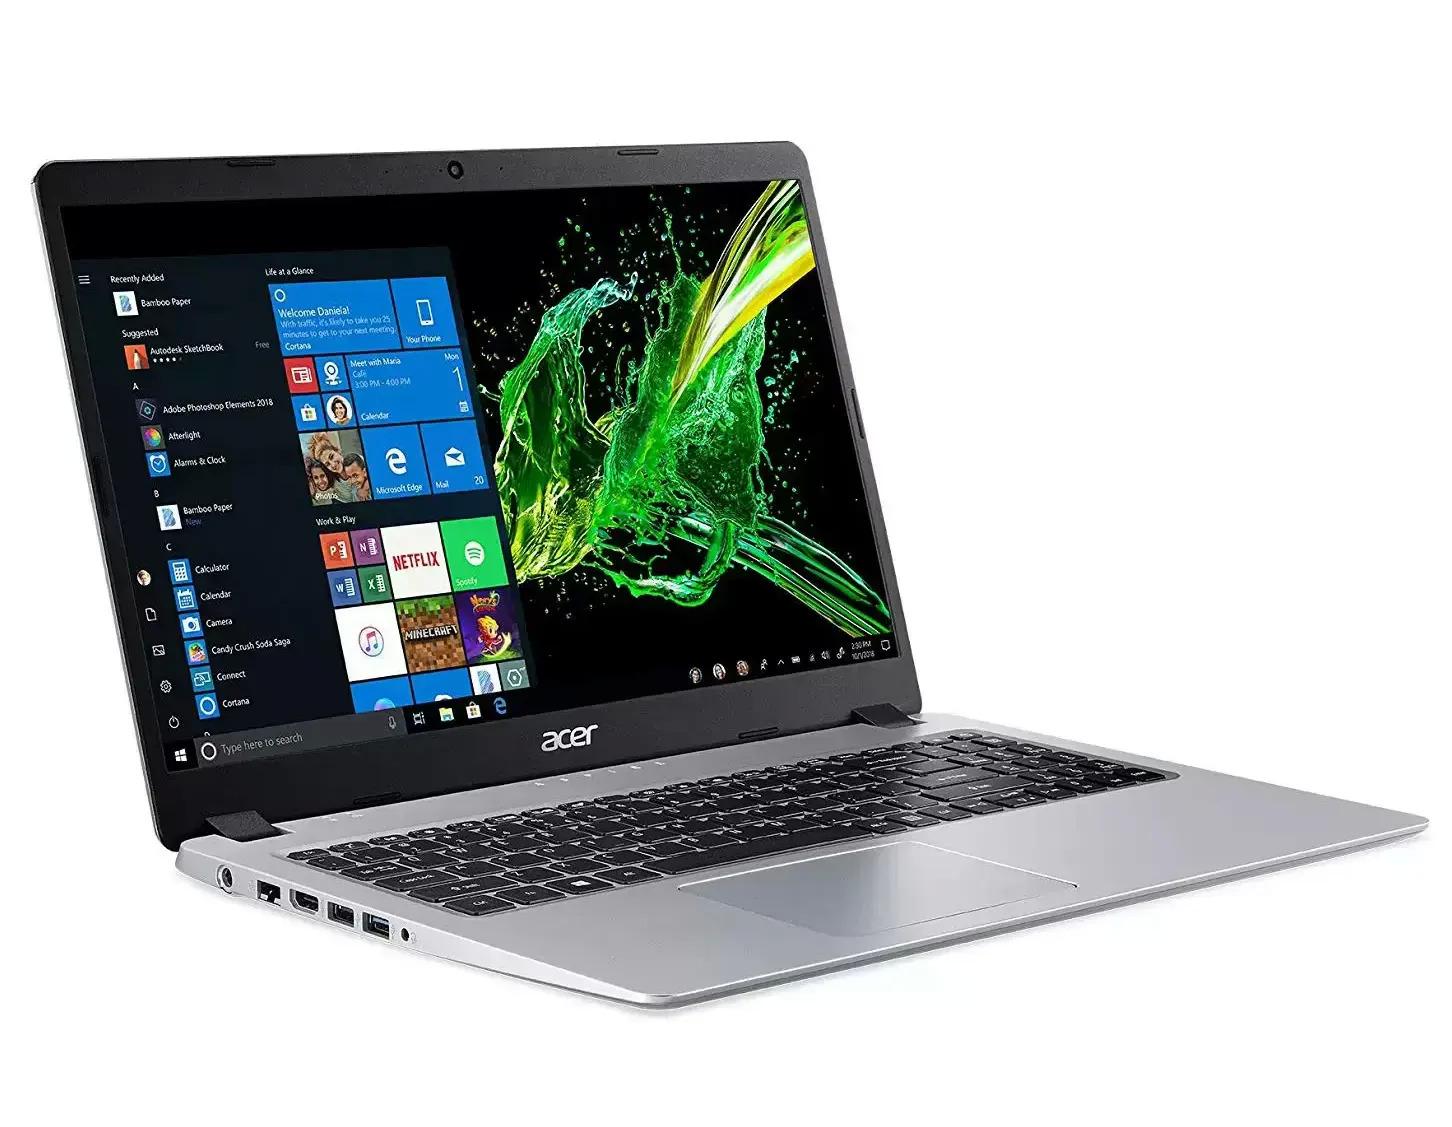 Acer Aspire 5 15.6in AMD Ryzen 3 4GB 128GB Slim Notebook Laptop for $219.99 Shipped